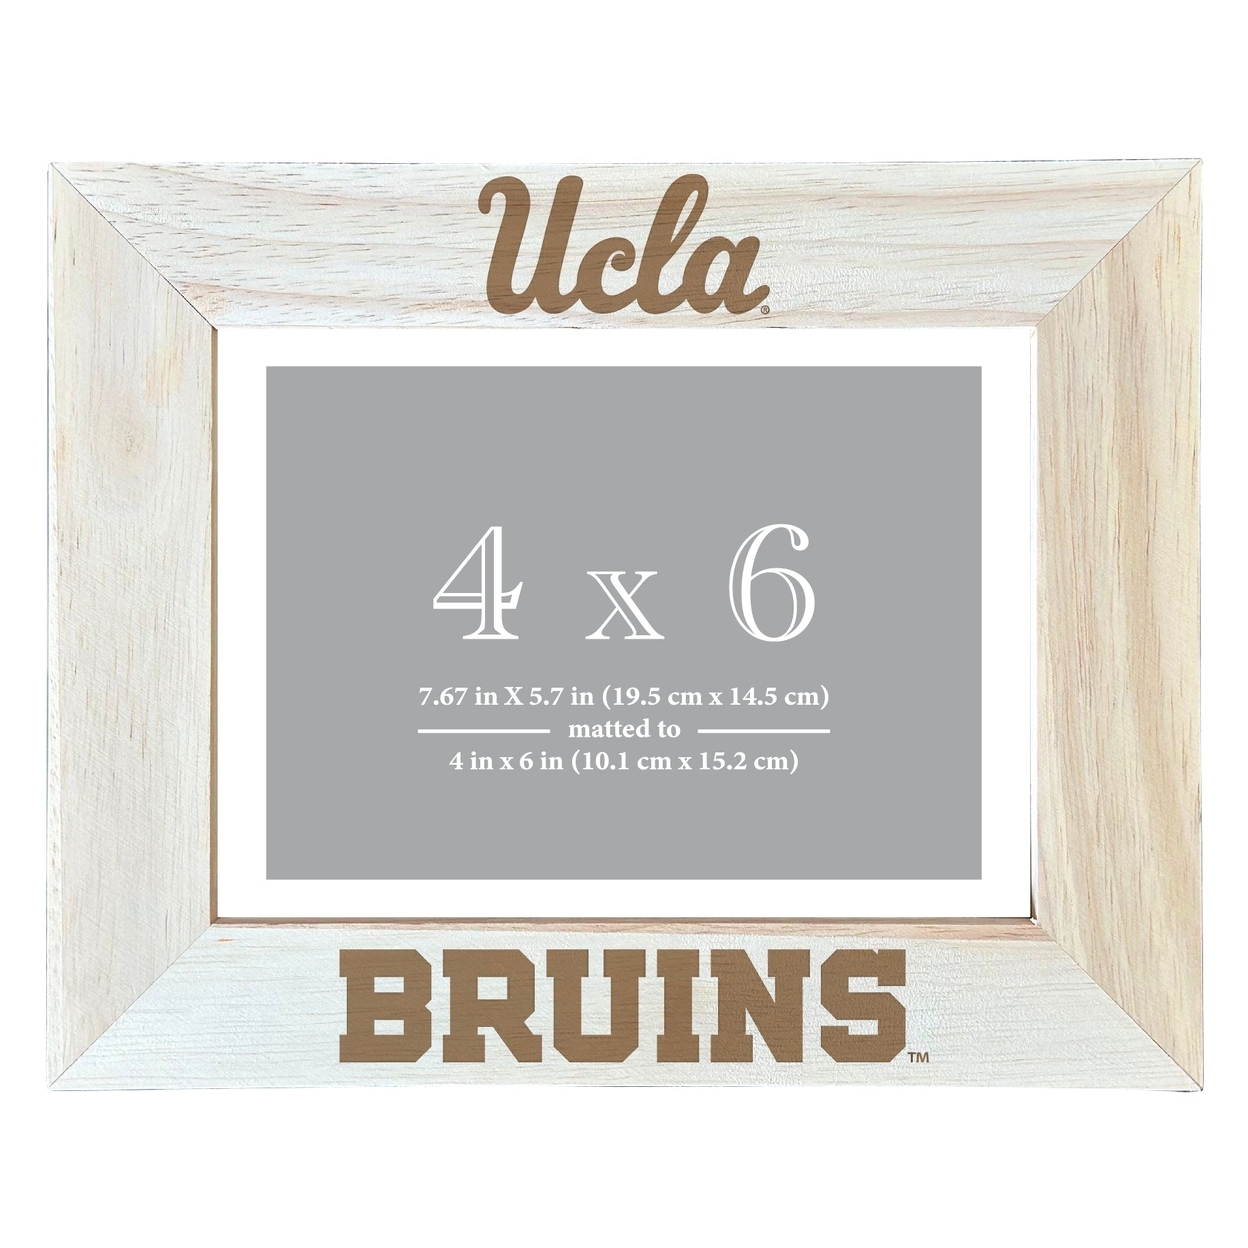 UCLA Bruins Wooden Photo Frame Matted To 4 X 6 Inch - Etched